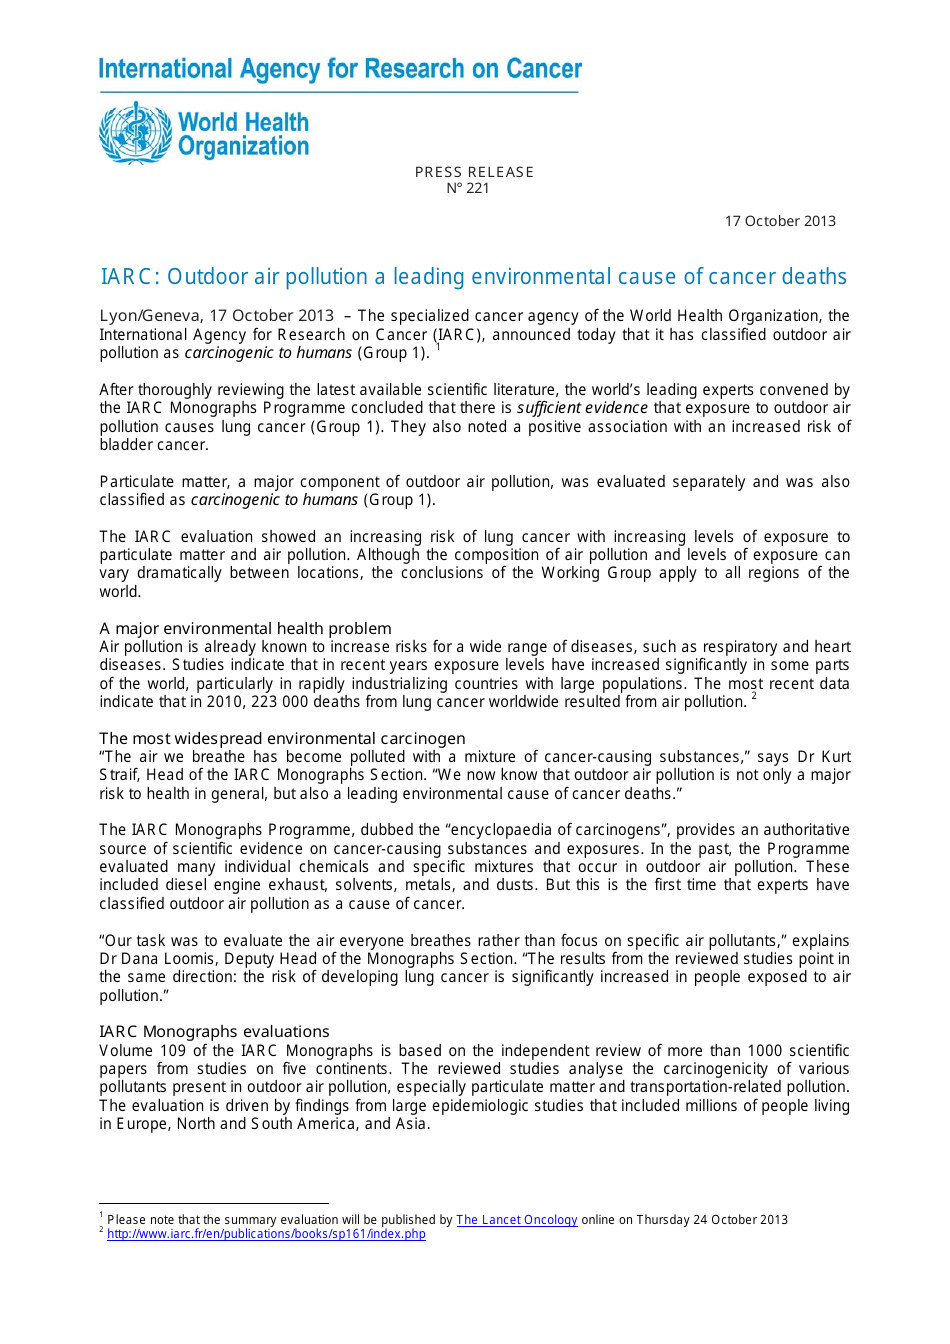 Press Release #221, Outdoor Air Pollution a Leading Environmental Cause of Cancer Deaths - World Health Organization International Agency for Research on Cancer, Page 1